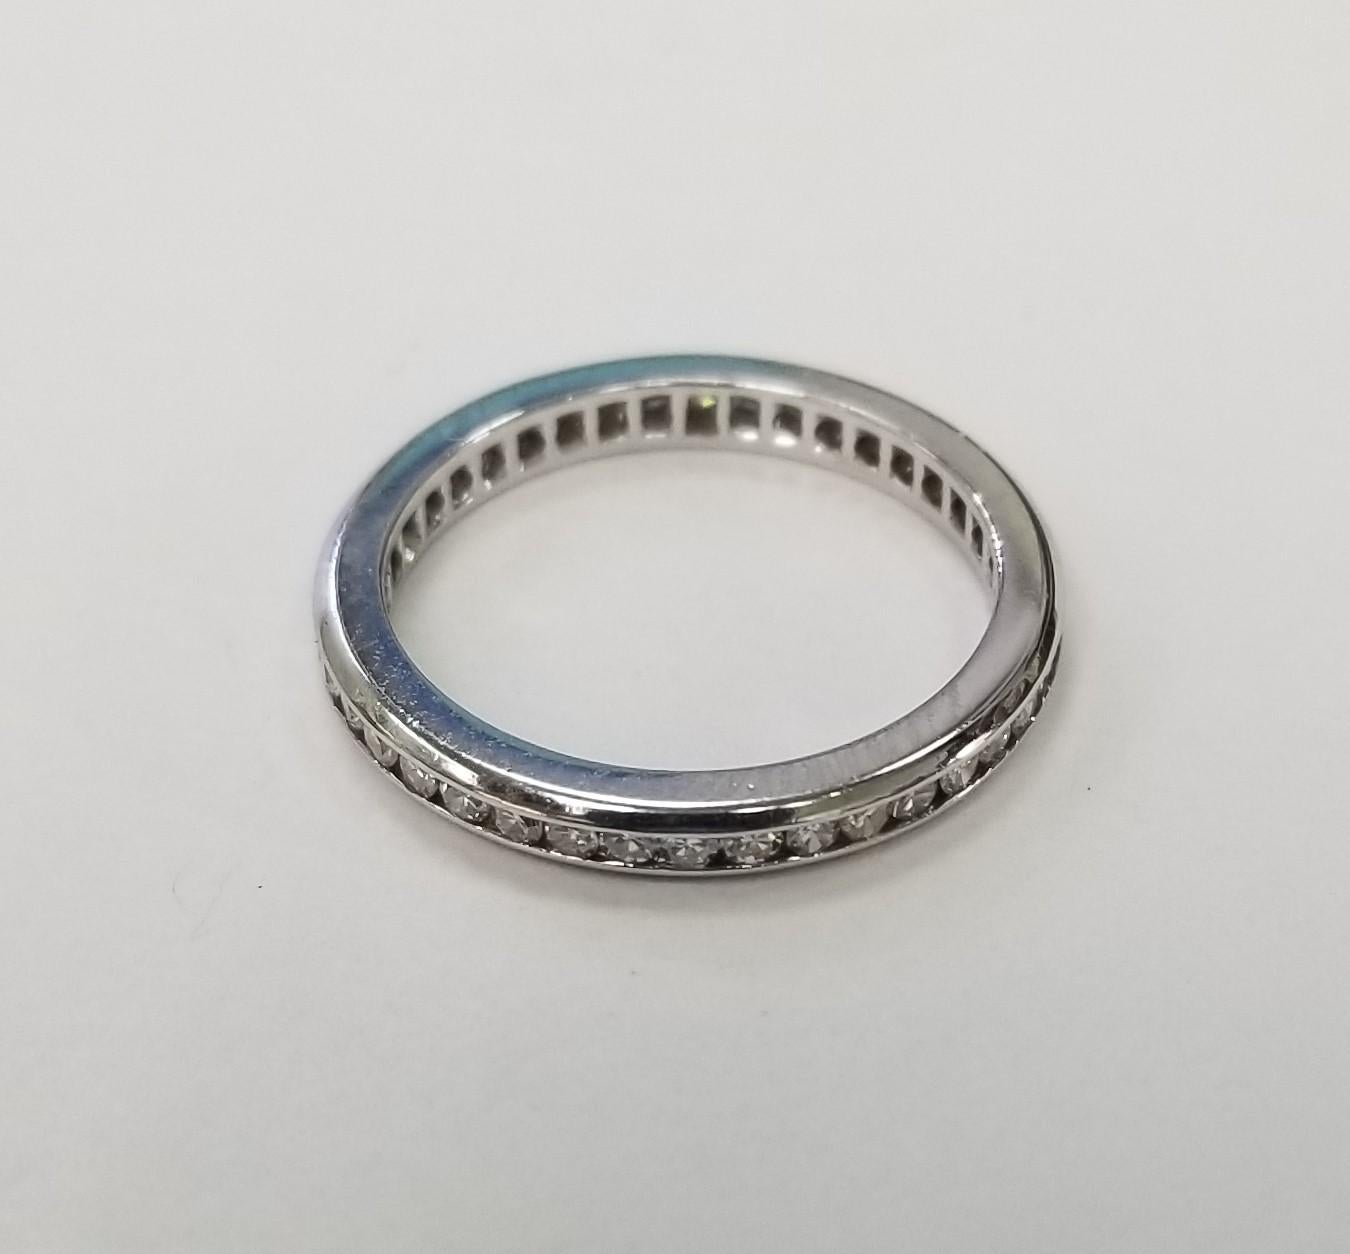 14k White Gold Diamond  Eternity Ring .85 carats containing 42 round single cut diamonds of very fine quality weighing .85cts, ring size is a 6.
Diamonds: 42 round single cut 
color : F
clarity: VS
weight: .85pts
metal: 14k white gold
weight: 2.2